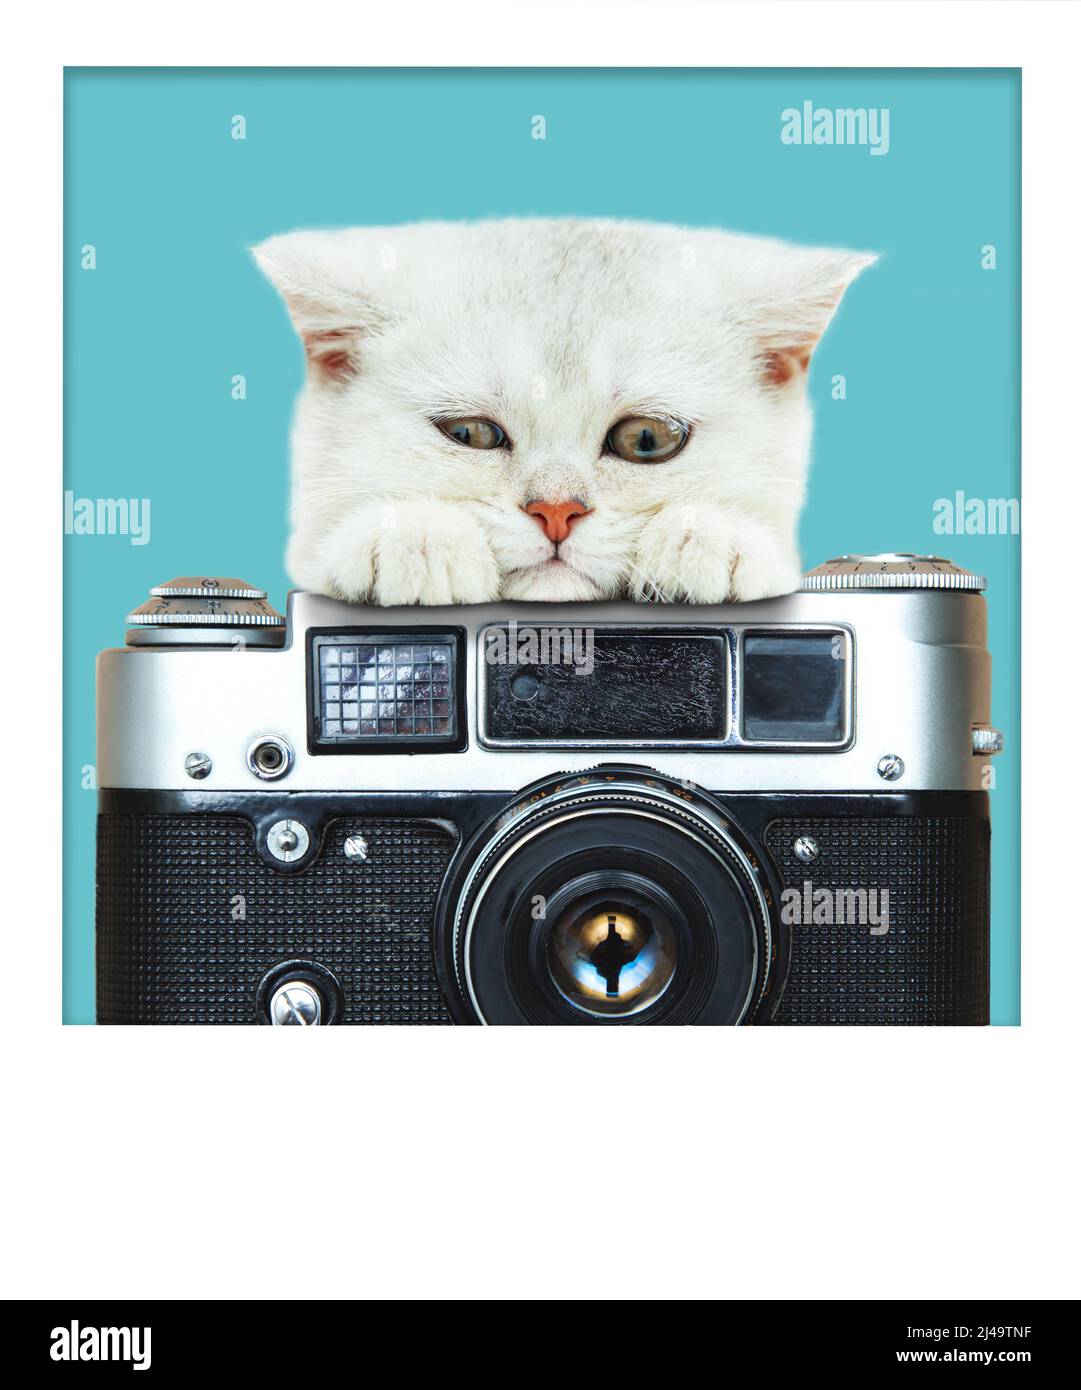 Sad white British kitten with a vintage camera on a blue background. Snapshot. Place for text. Stock Photo